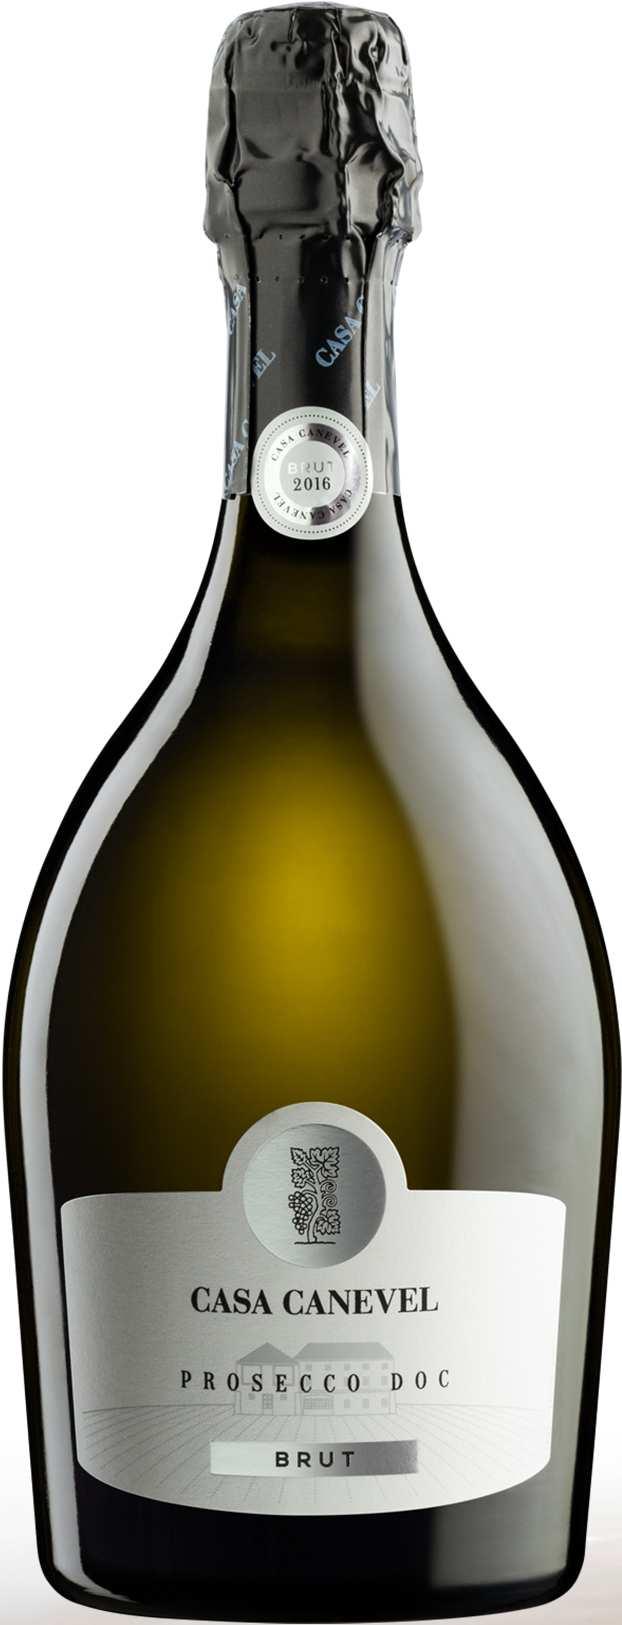 CASA CANEVEL PROSECCO DOC BRUT Sparkling wine with a lively mousse and fresh aromas of fruit and flowers.